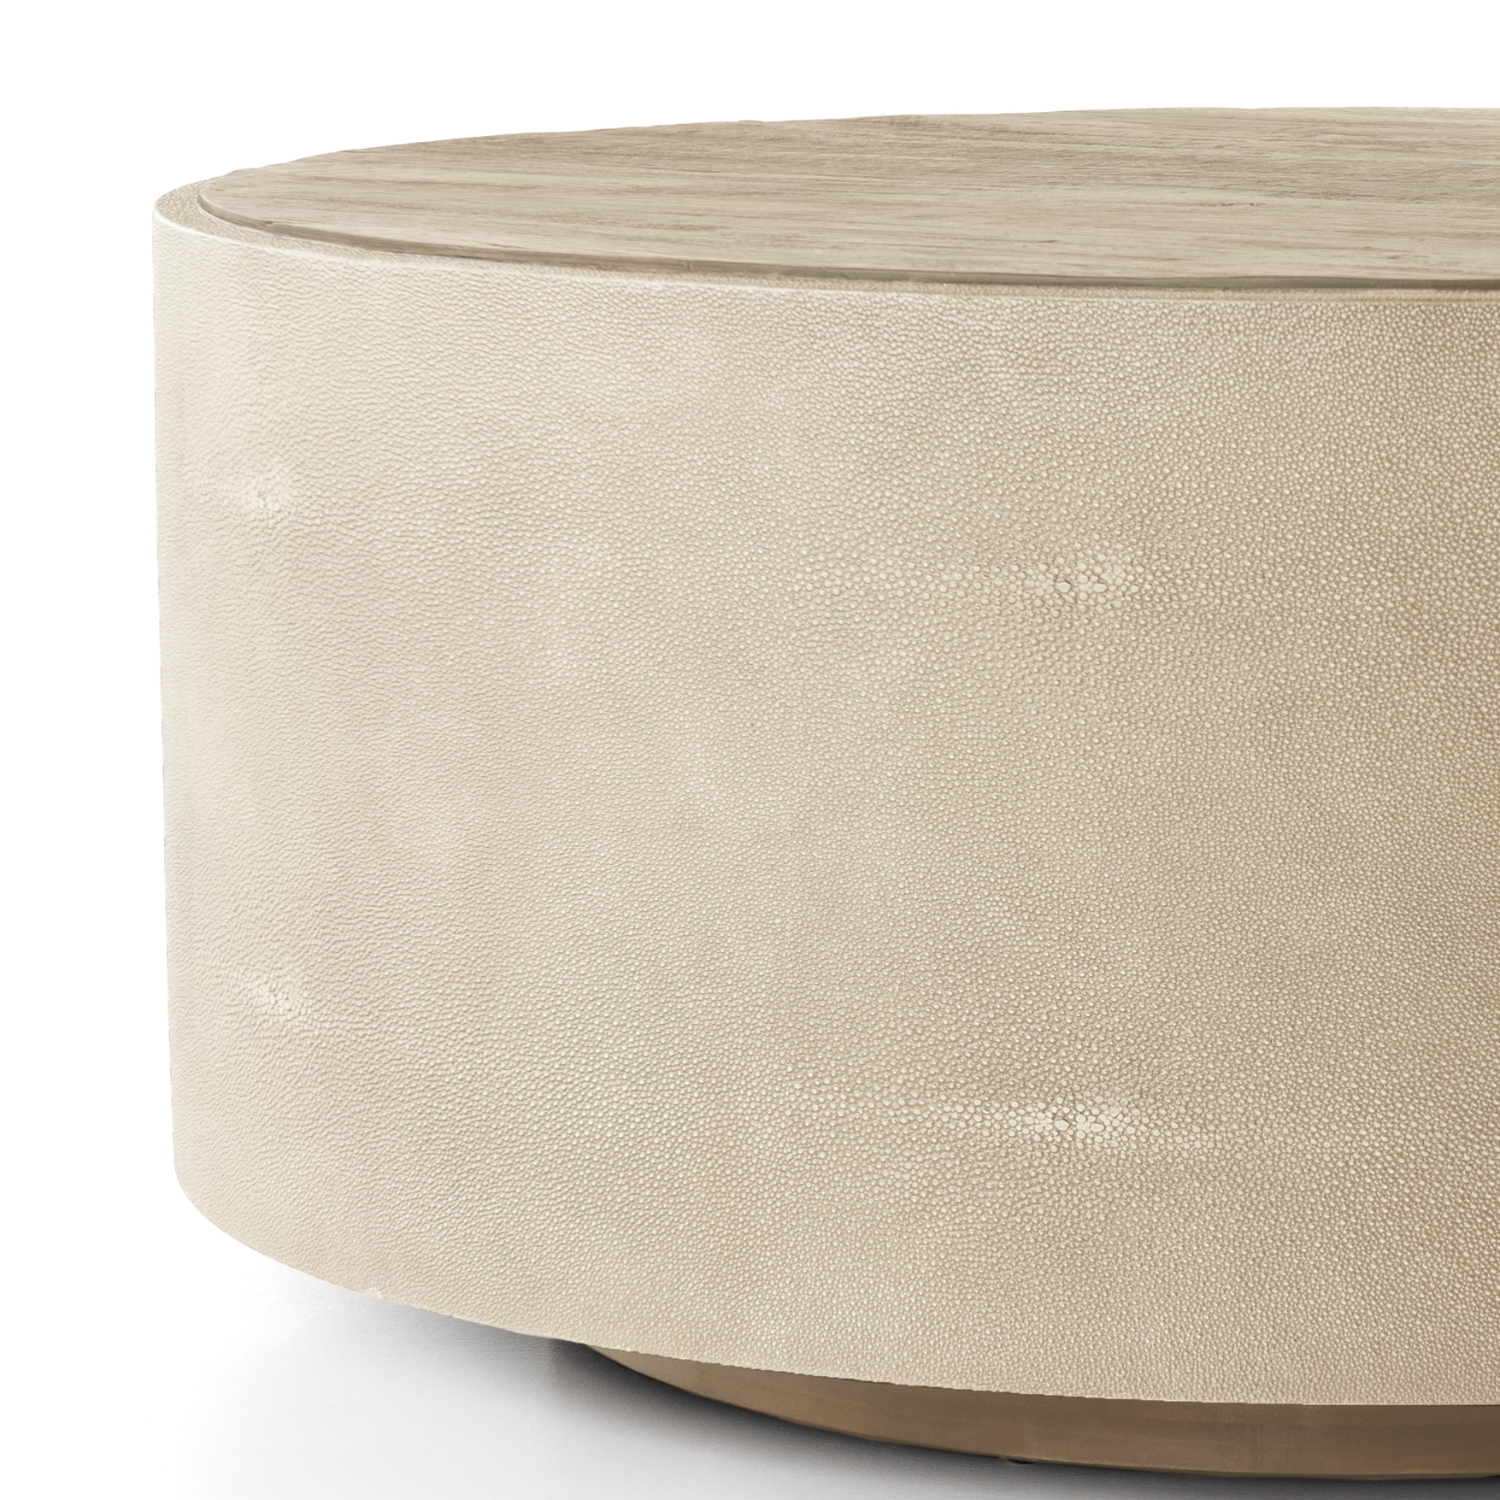 Crosby Round Coffee Table